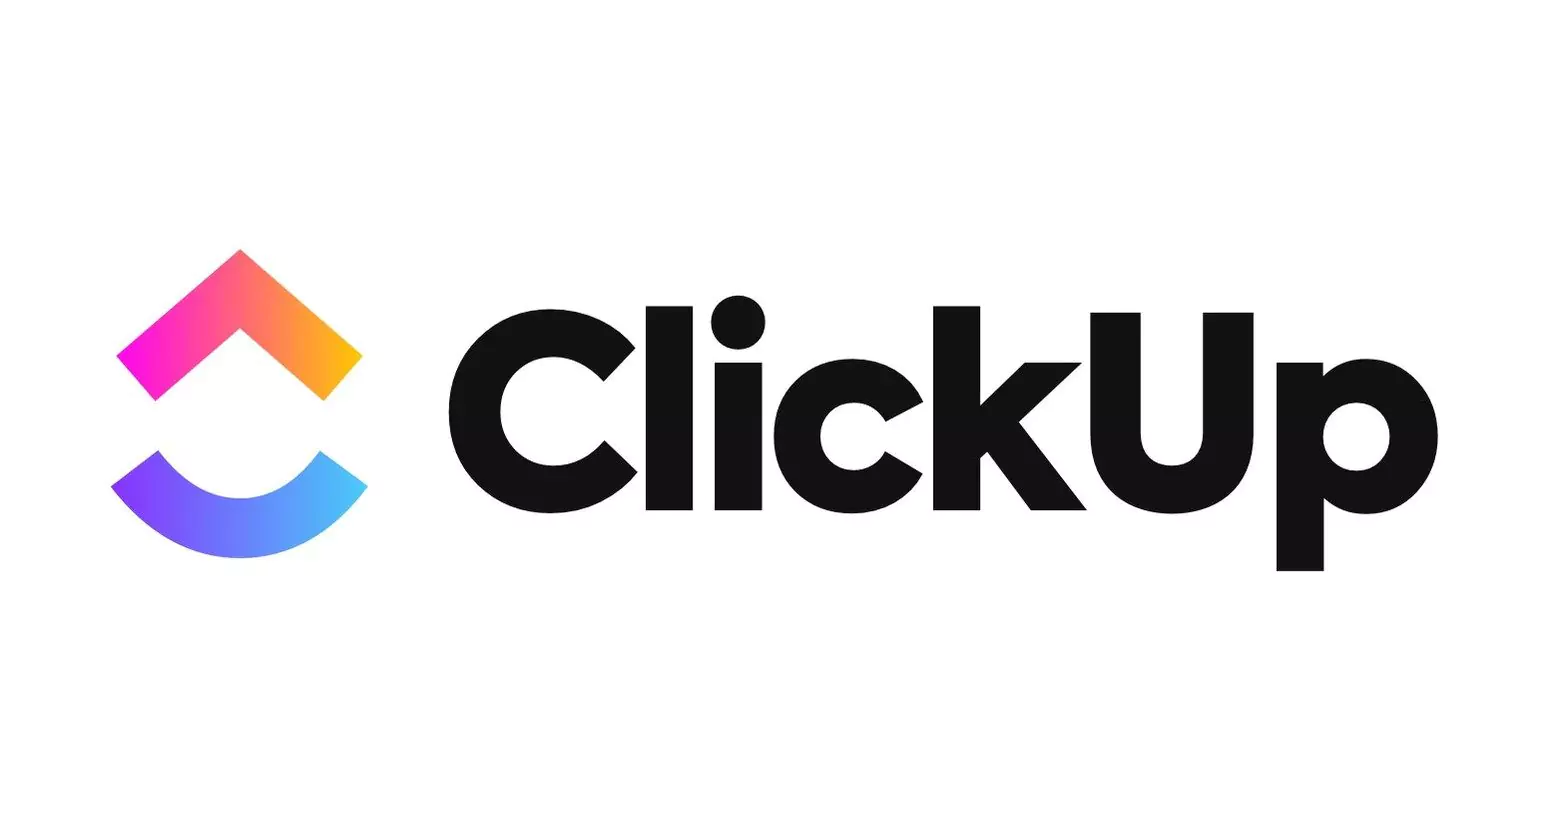 ClickUp revolutionizes software teams with novel technologies that boost productivity.